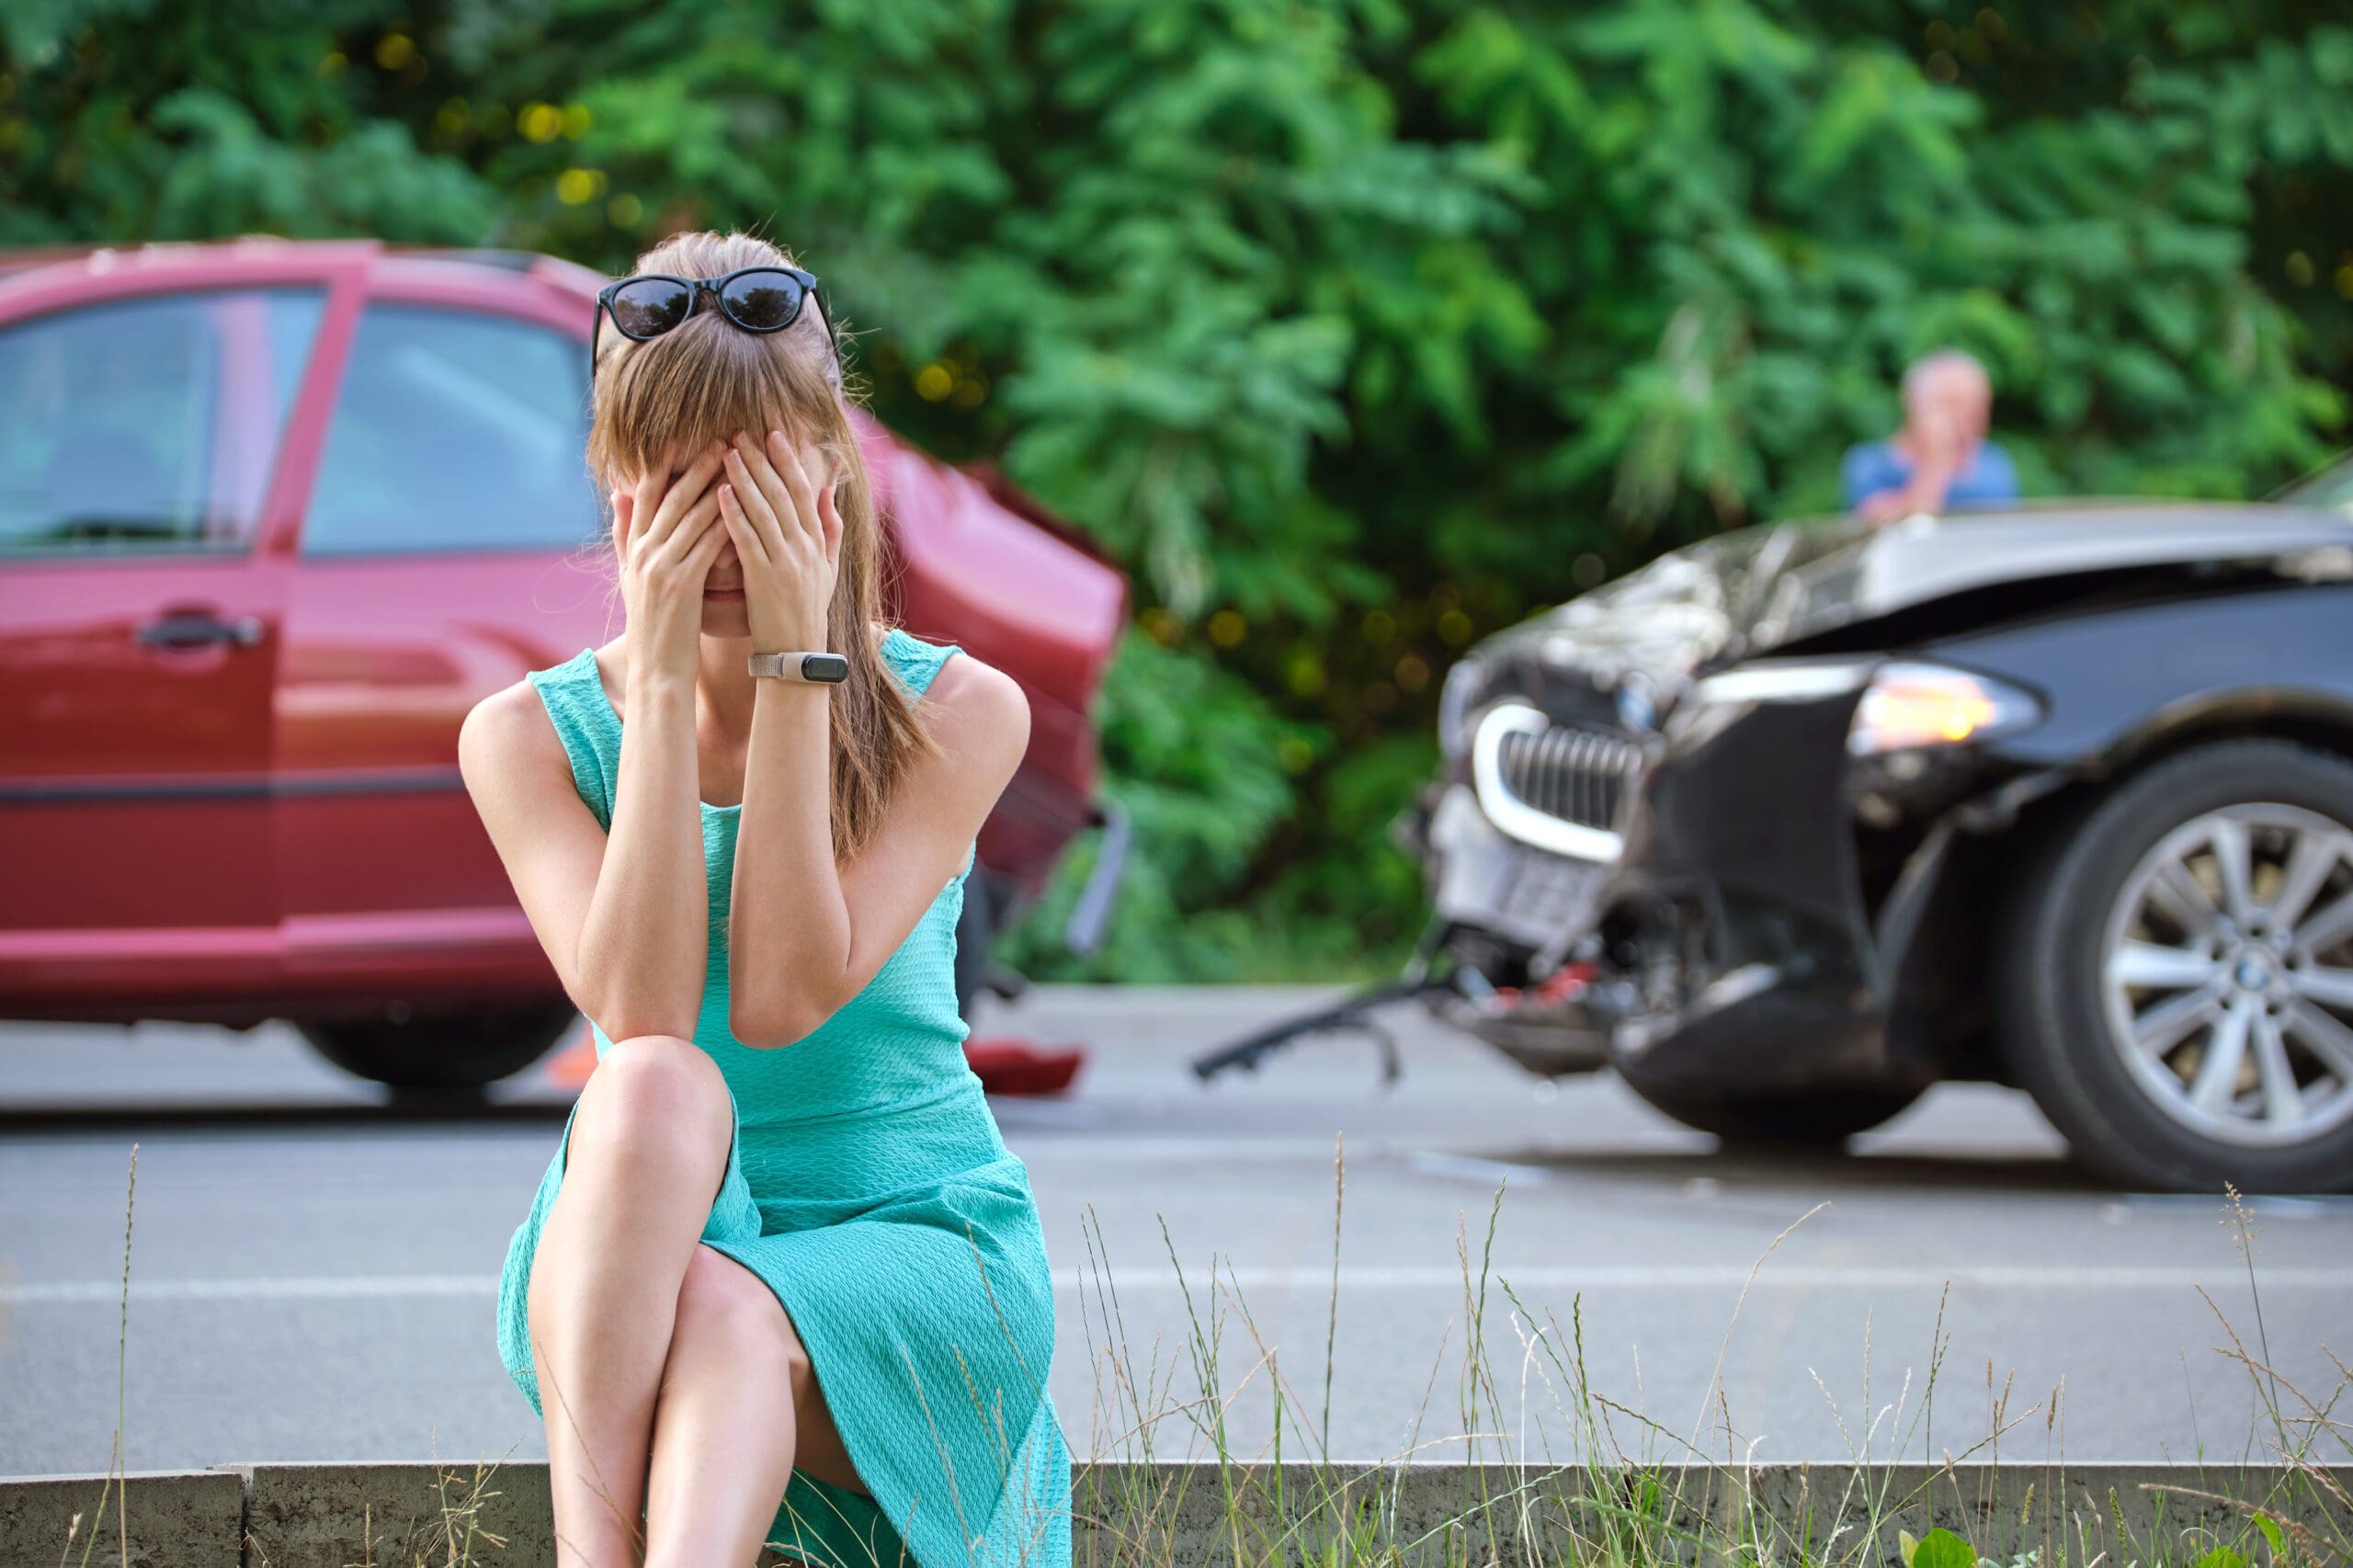 How To Resolve Issues With St Louis Accident Lawyers